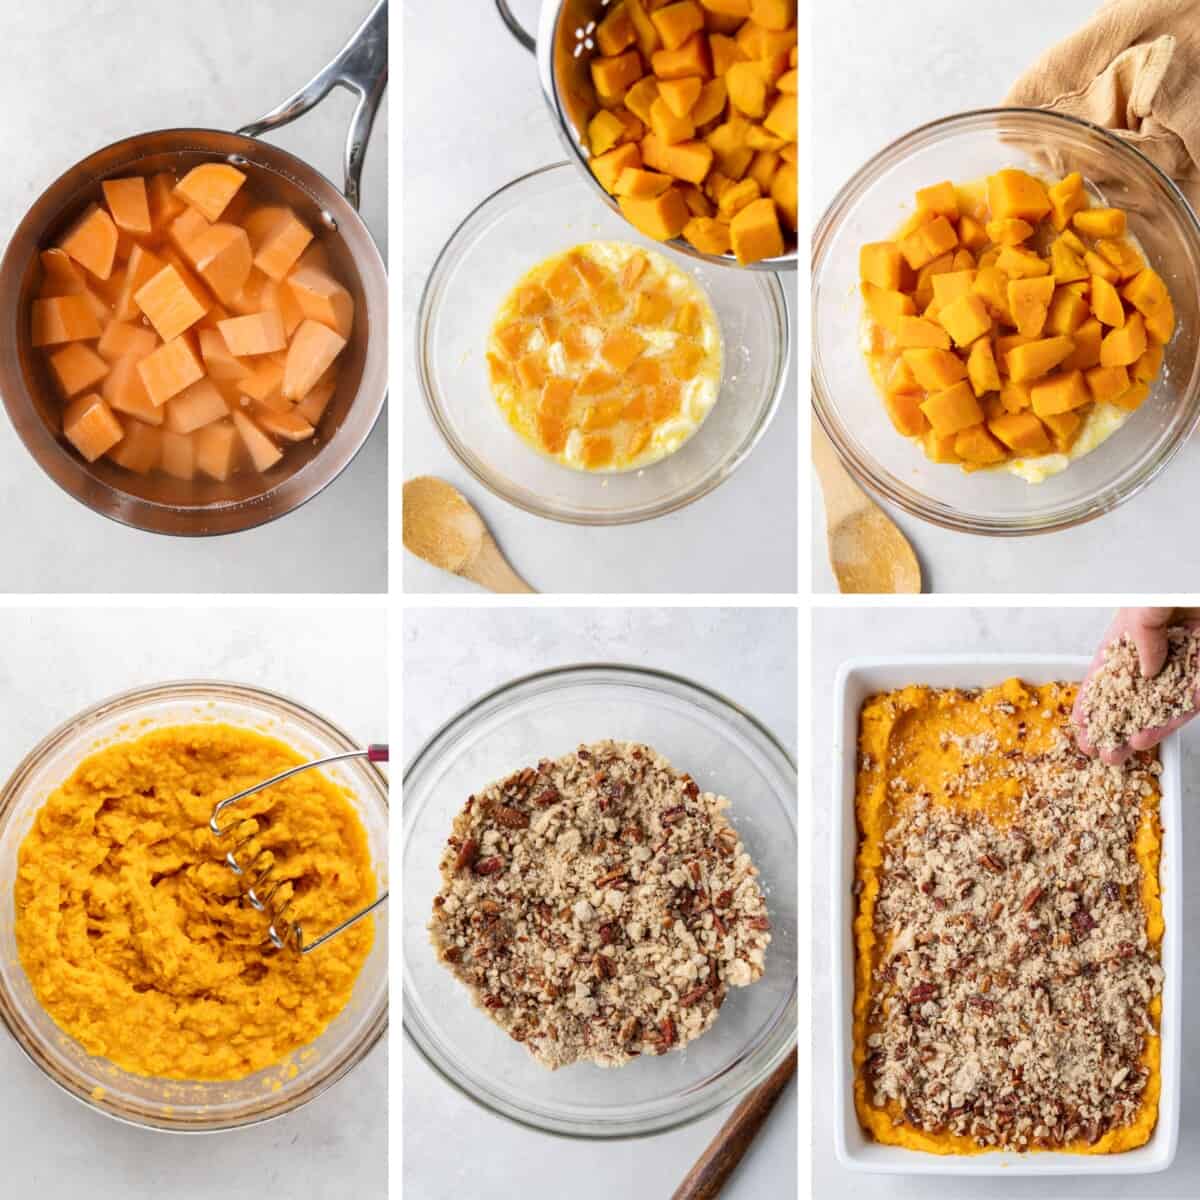 A grid of process images showing the individual steps to make sweet potato casserole.